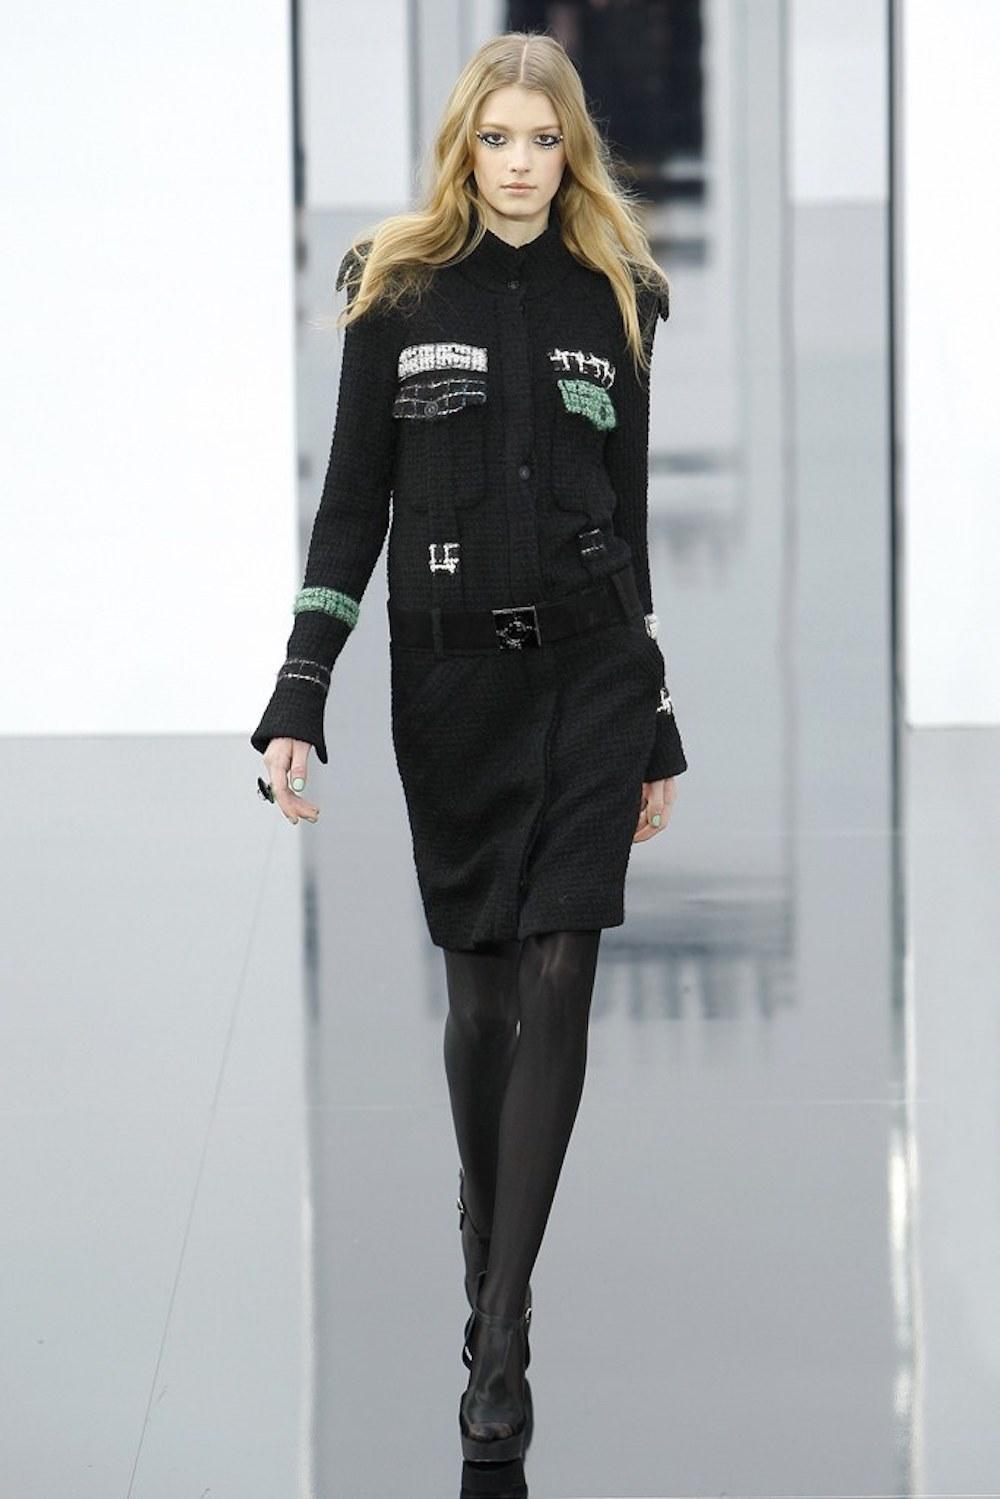 2009 Chanel Runway Look Black Wool Belted Dress / Coat (Large Size) For Sale 9